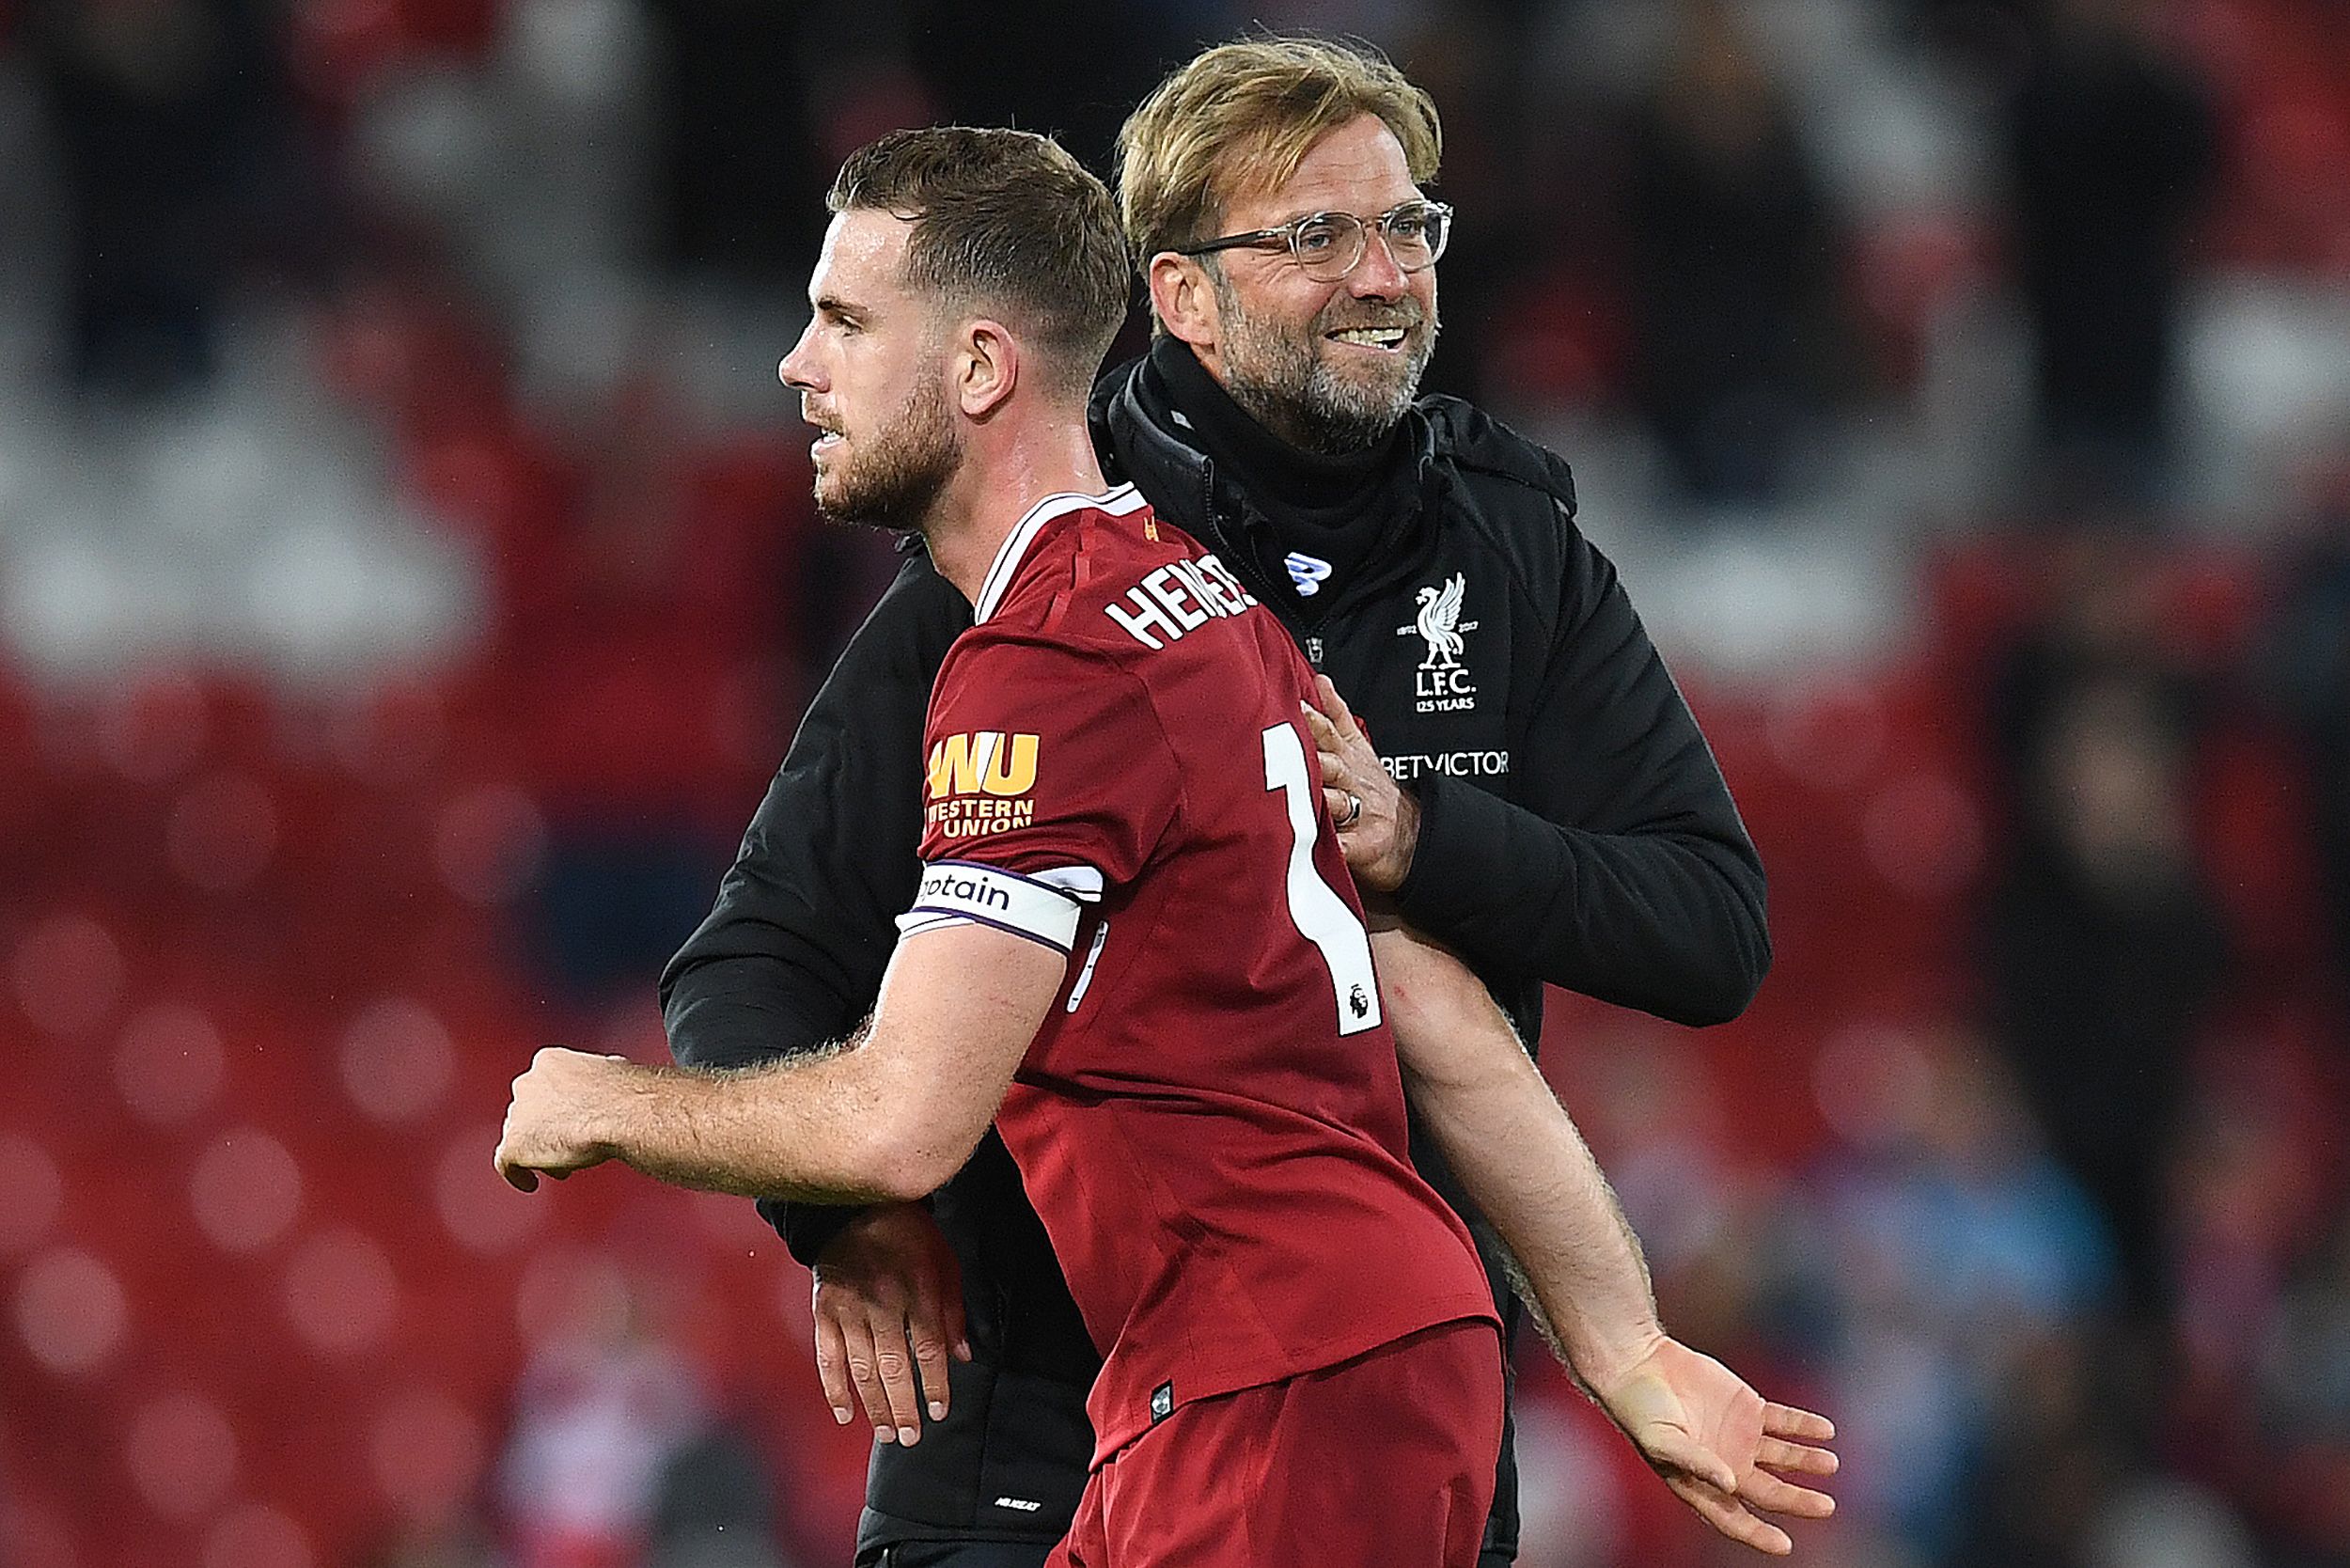 Liverpool's German manager Jurgen Klopp hugs Liverpool's English midfielder Jordan Henderson following the English Premier League football match between Liverpool and Southampton at Anfield in Liverpool, north west England on November 18, 2017. / AFP PHOTO / Paul ELLIS / RESTRICTED TO EDITORIAL USE. No use with unauthorized audio, video, data, fixture lists, club/league logos or 'live' services. Online in-match use limited to 75 images, no video emulation. No use in betting, games or single club/league/player publications.  /         (Photo credit should read PAUL ELLIS/AFP/Getty Images)